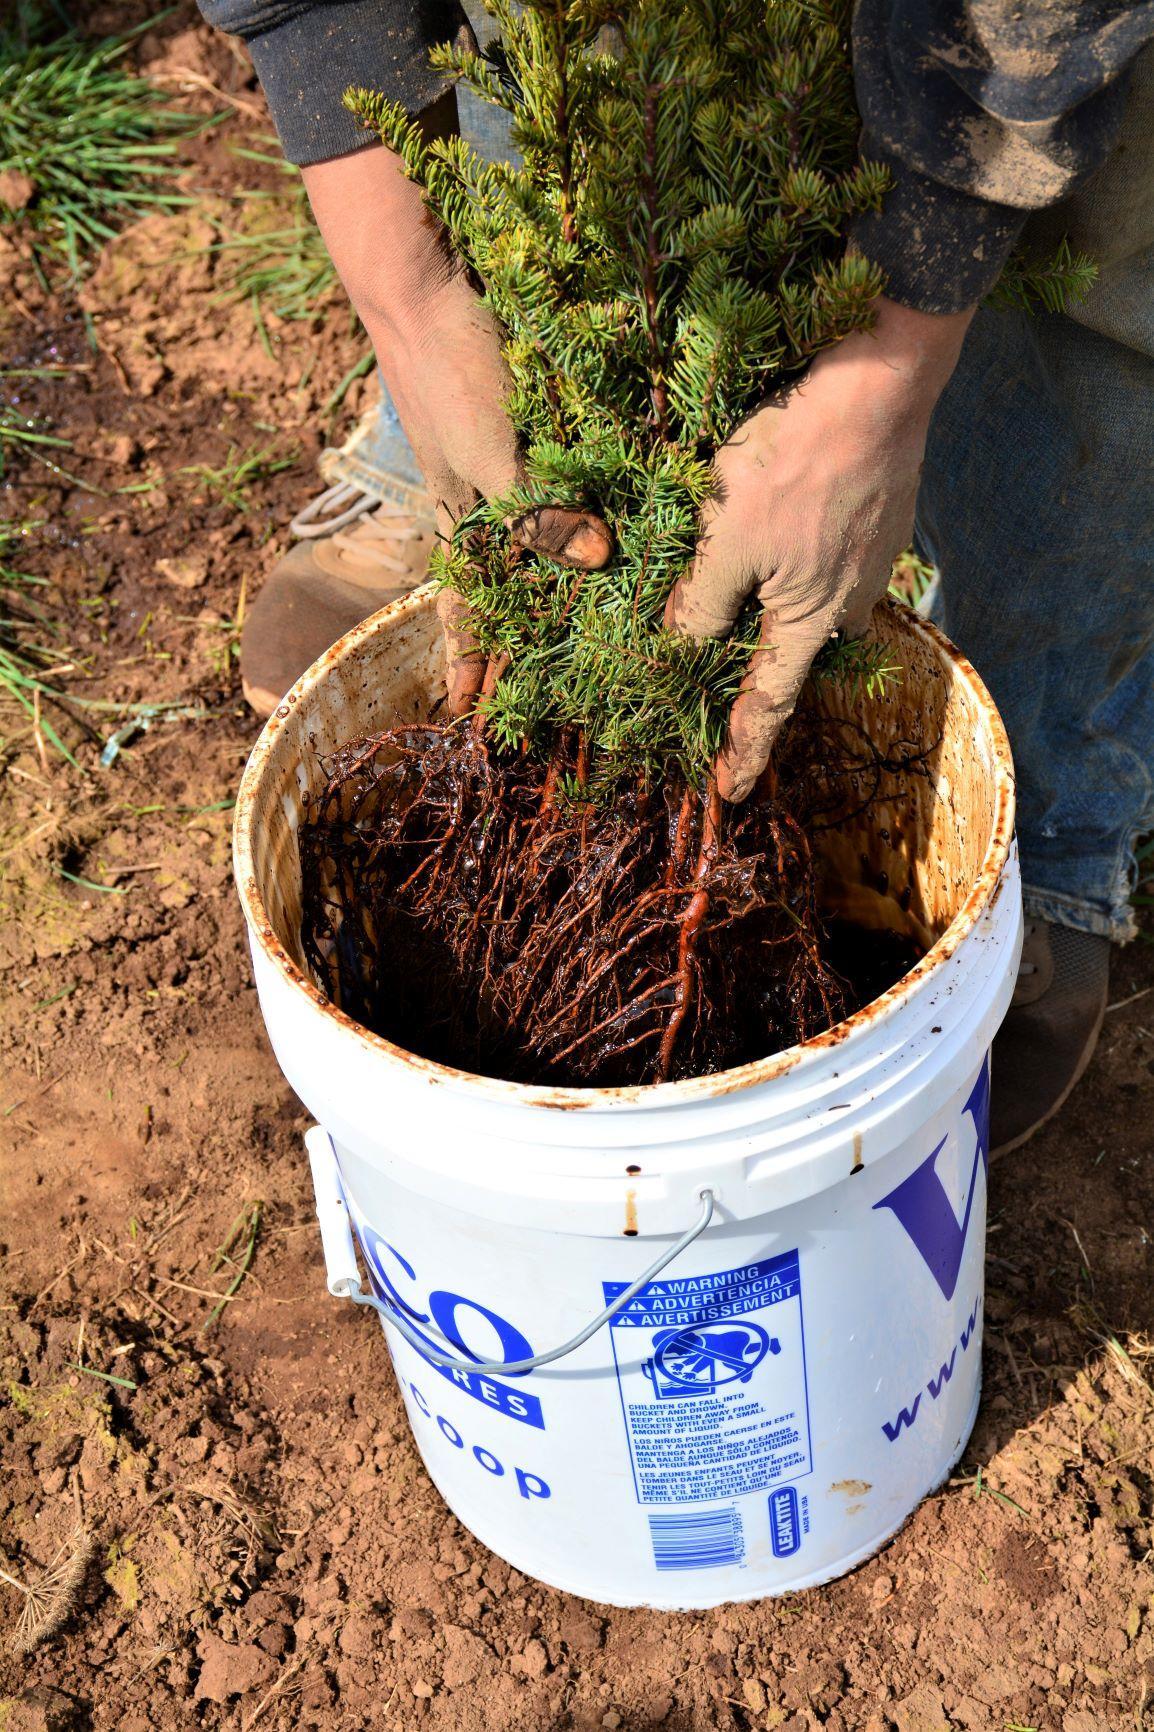 Dipping roots before planting to increase moisture retention.